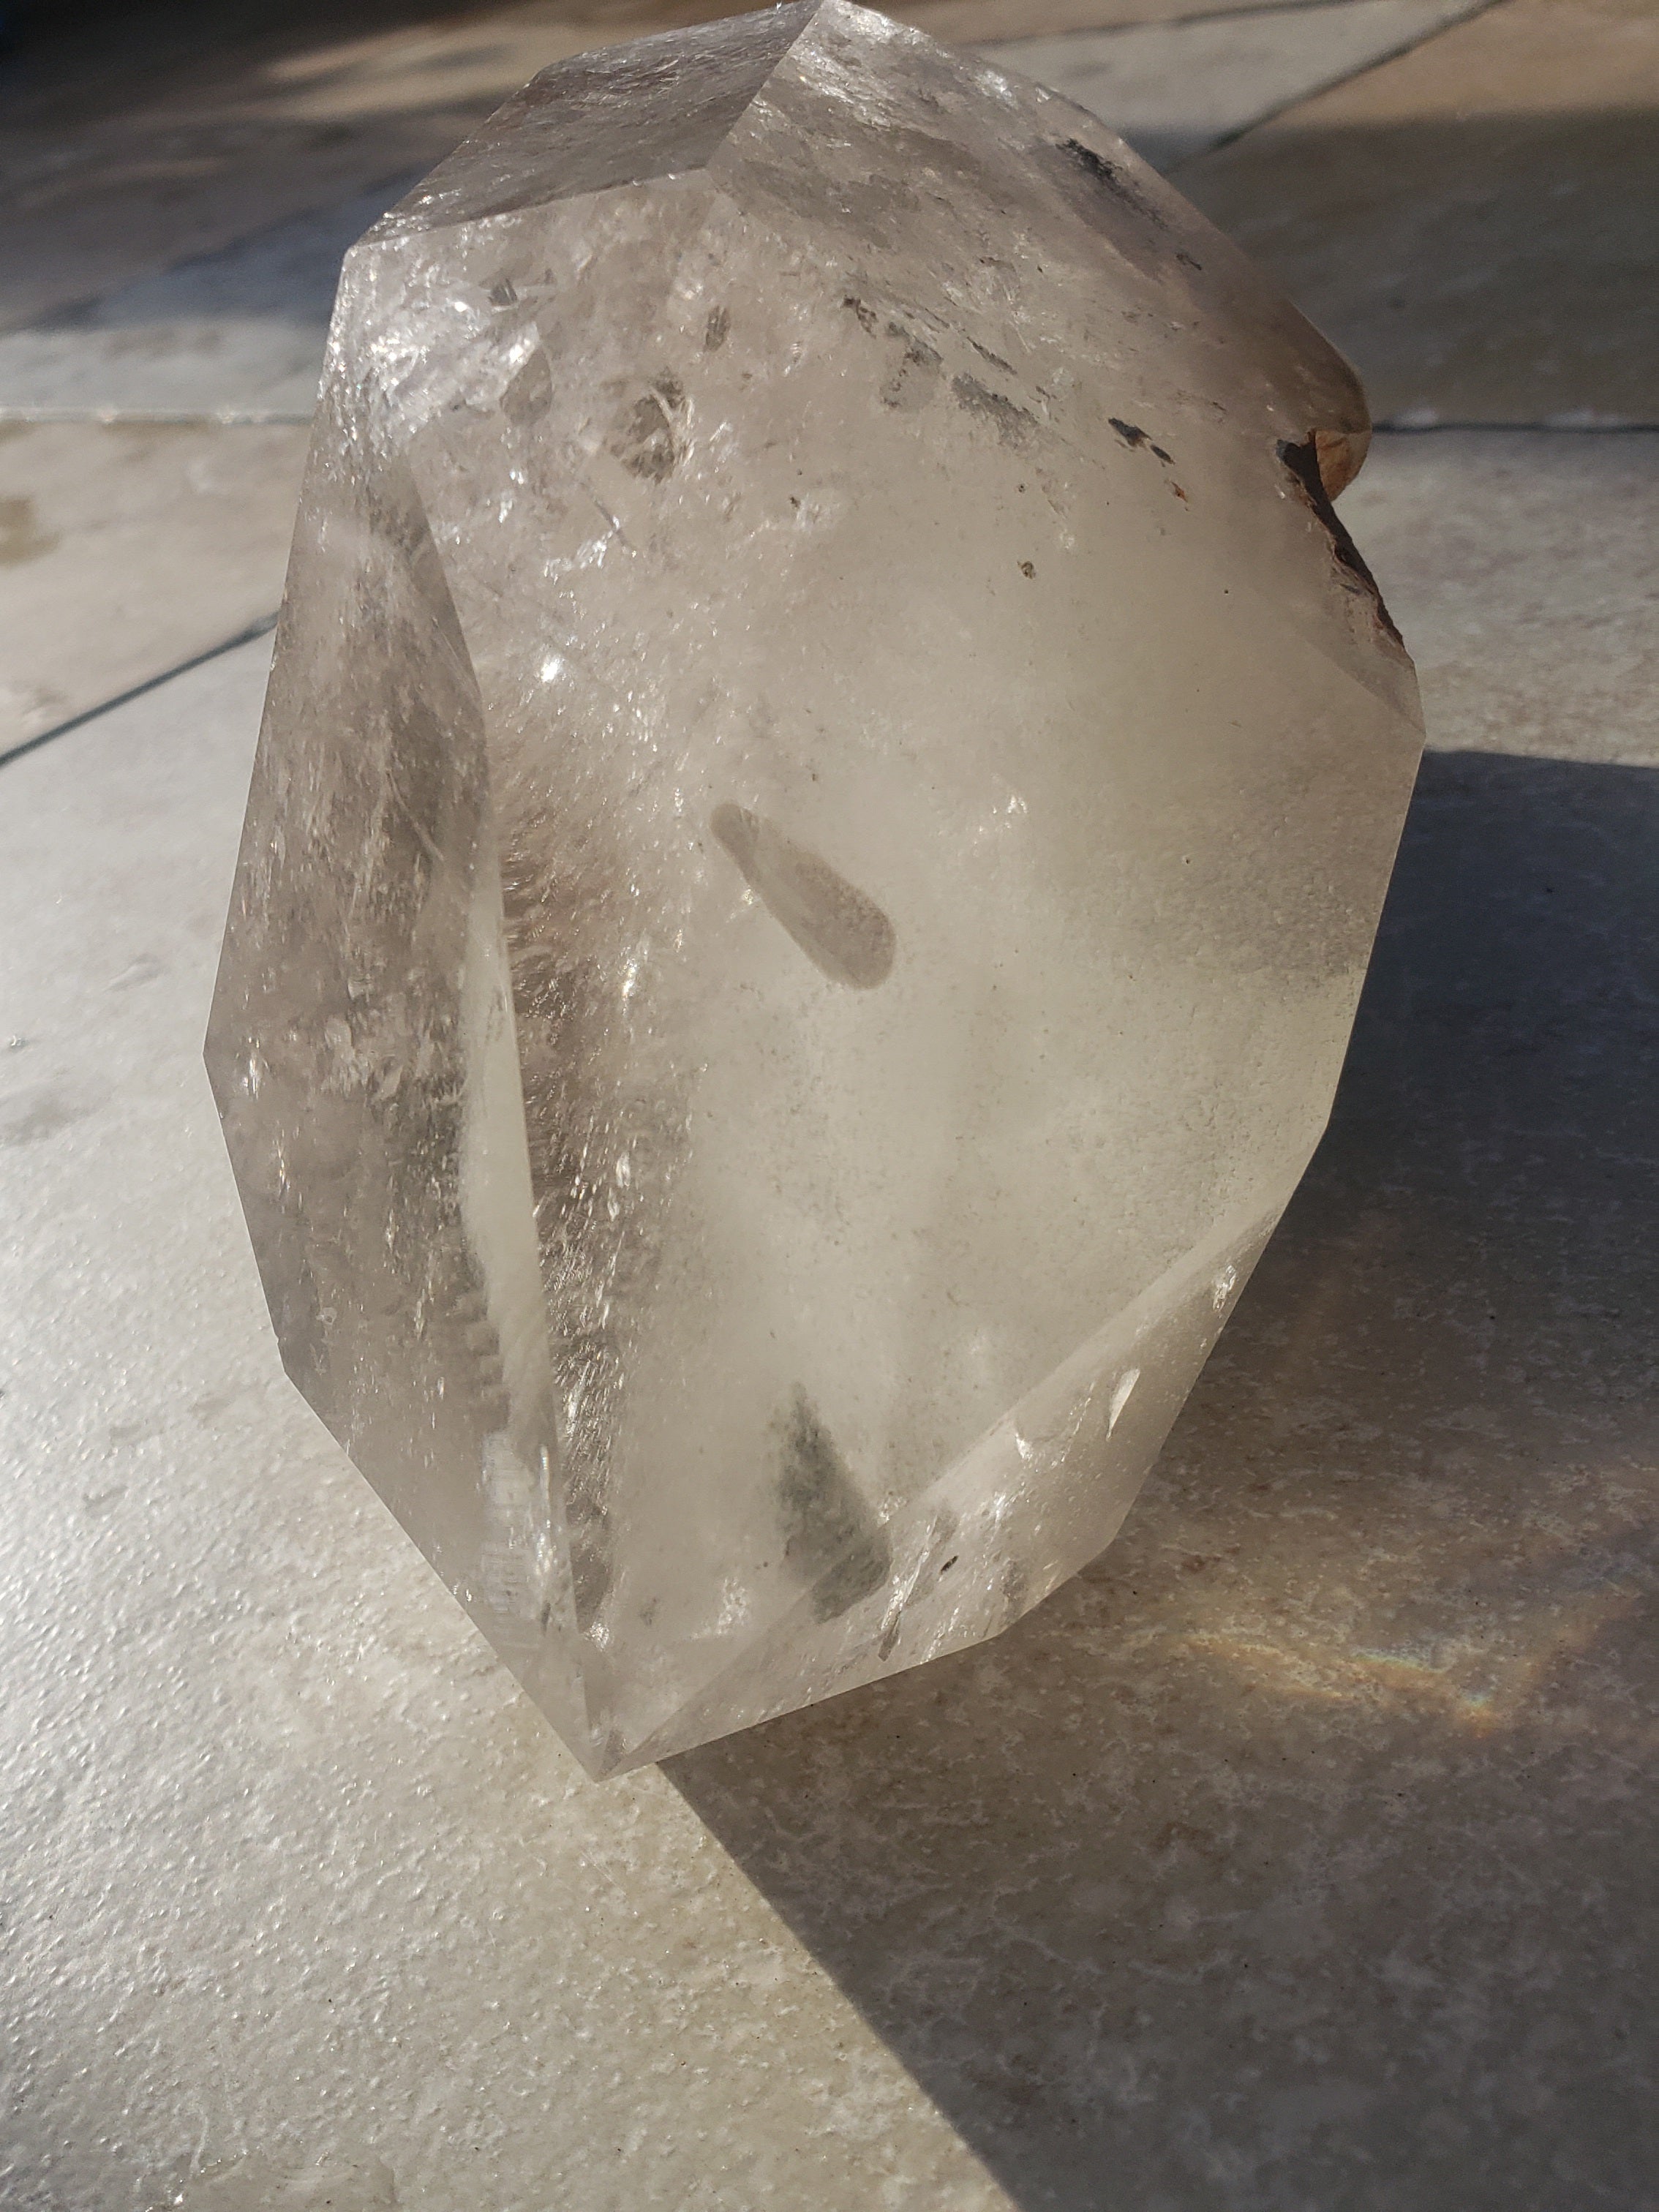 Large polished wuartz with heaps phantoms and inclusions - 3.6kg